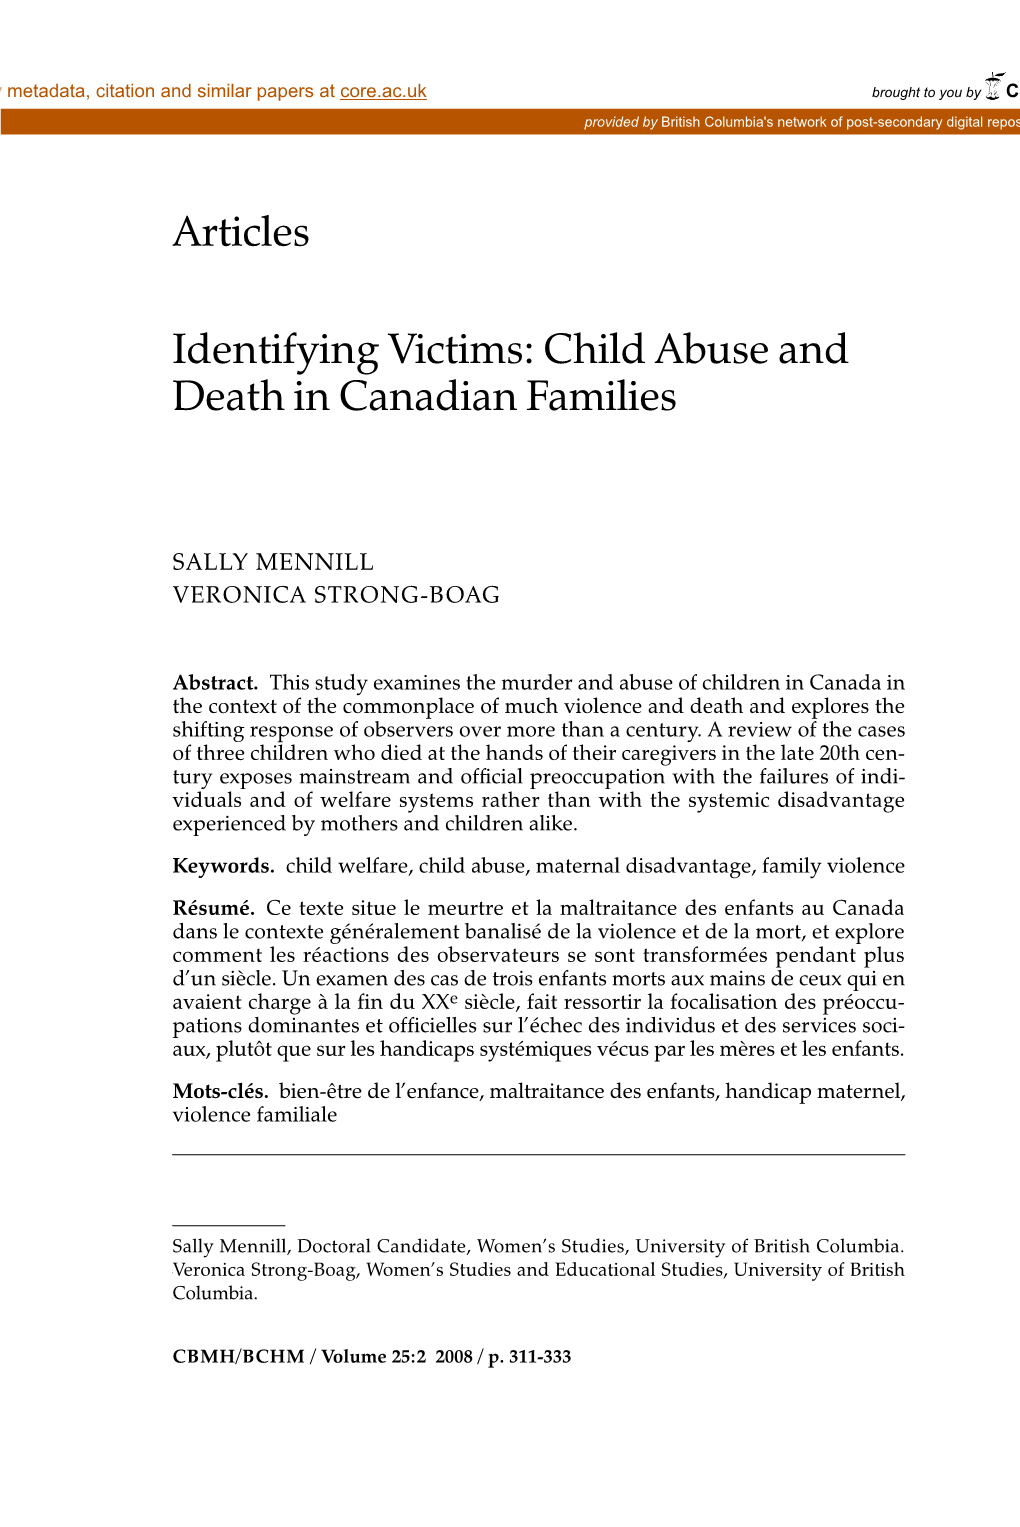 Child Abuse and Death in Canadian Families